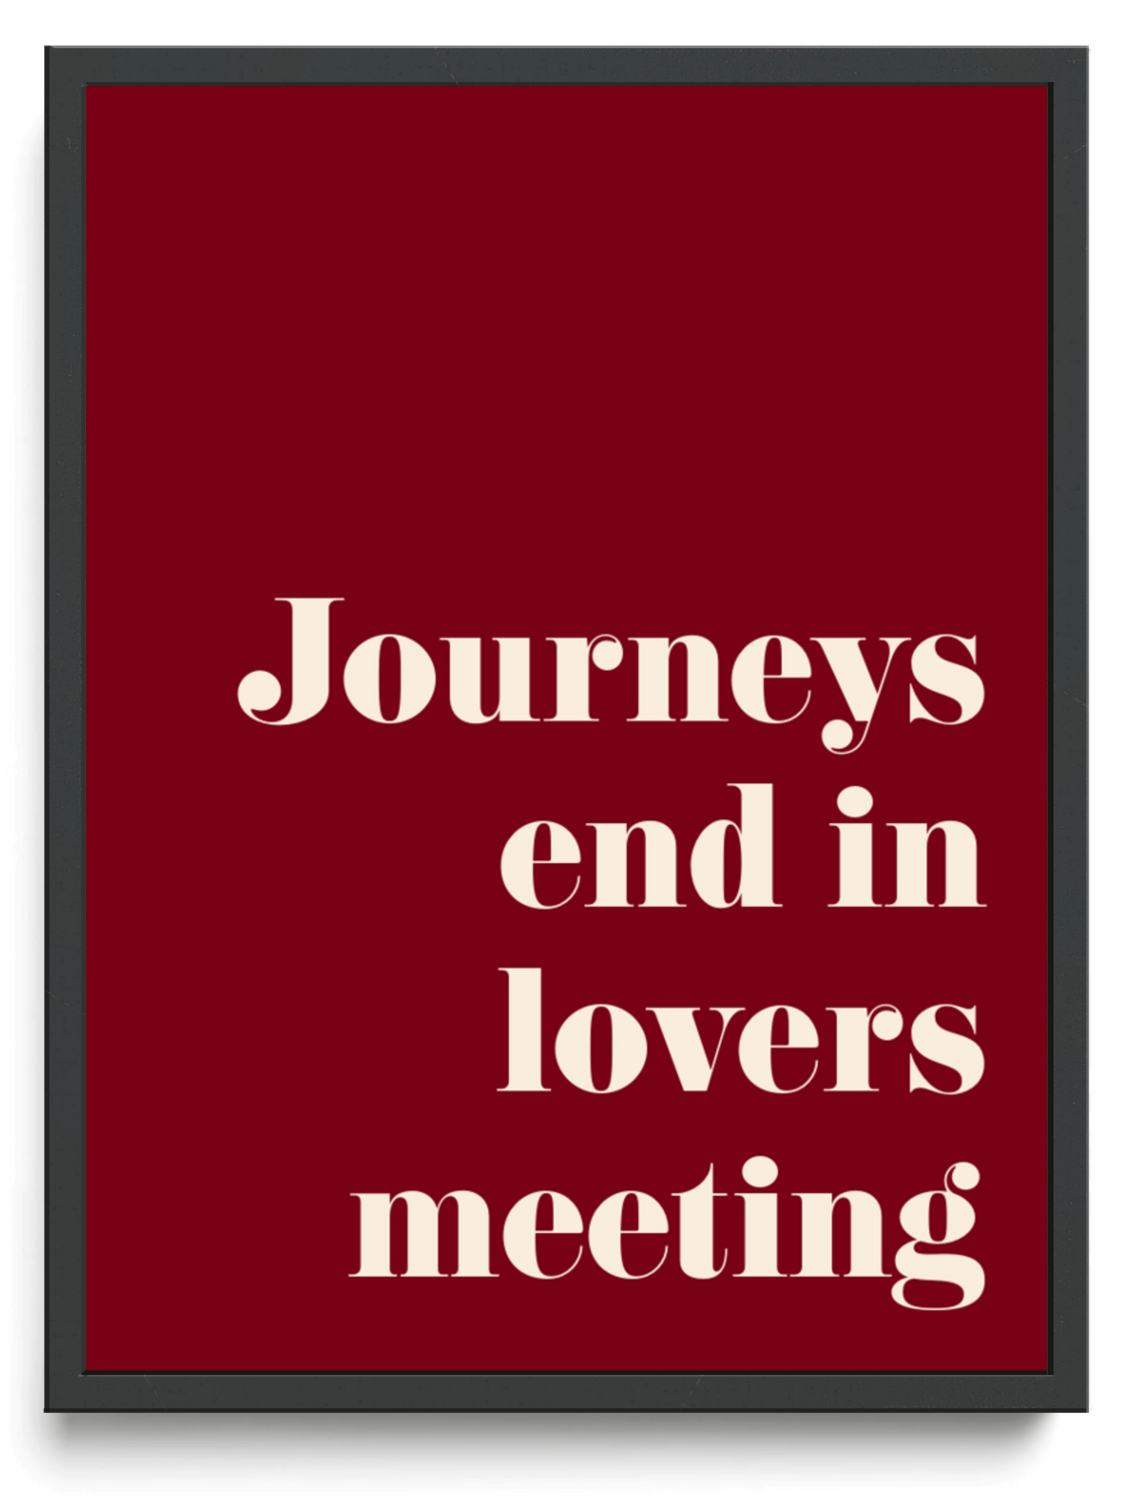 Journeys end in lovers meeting framed typographic print